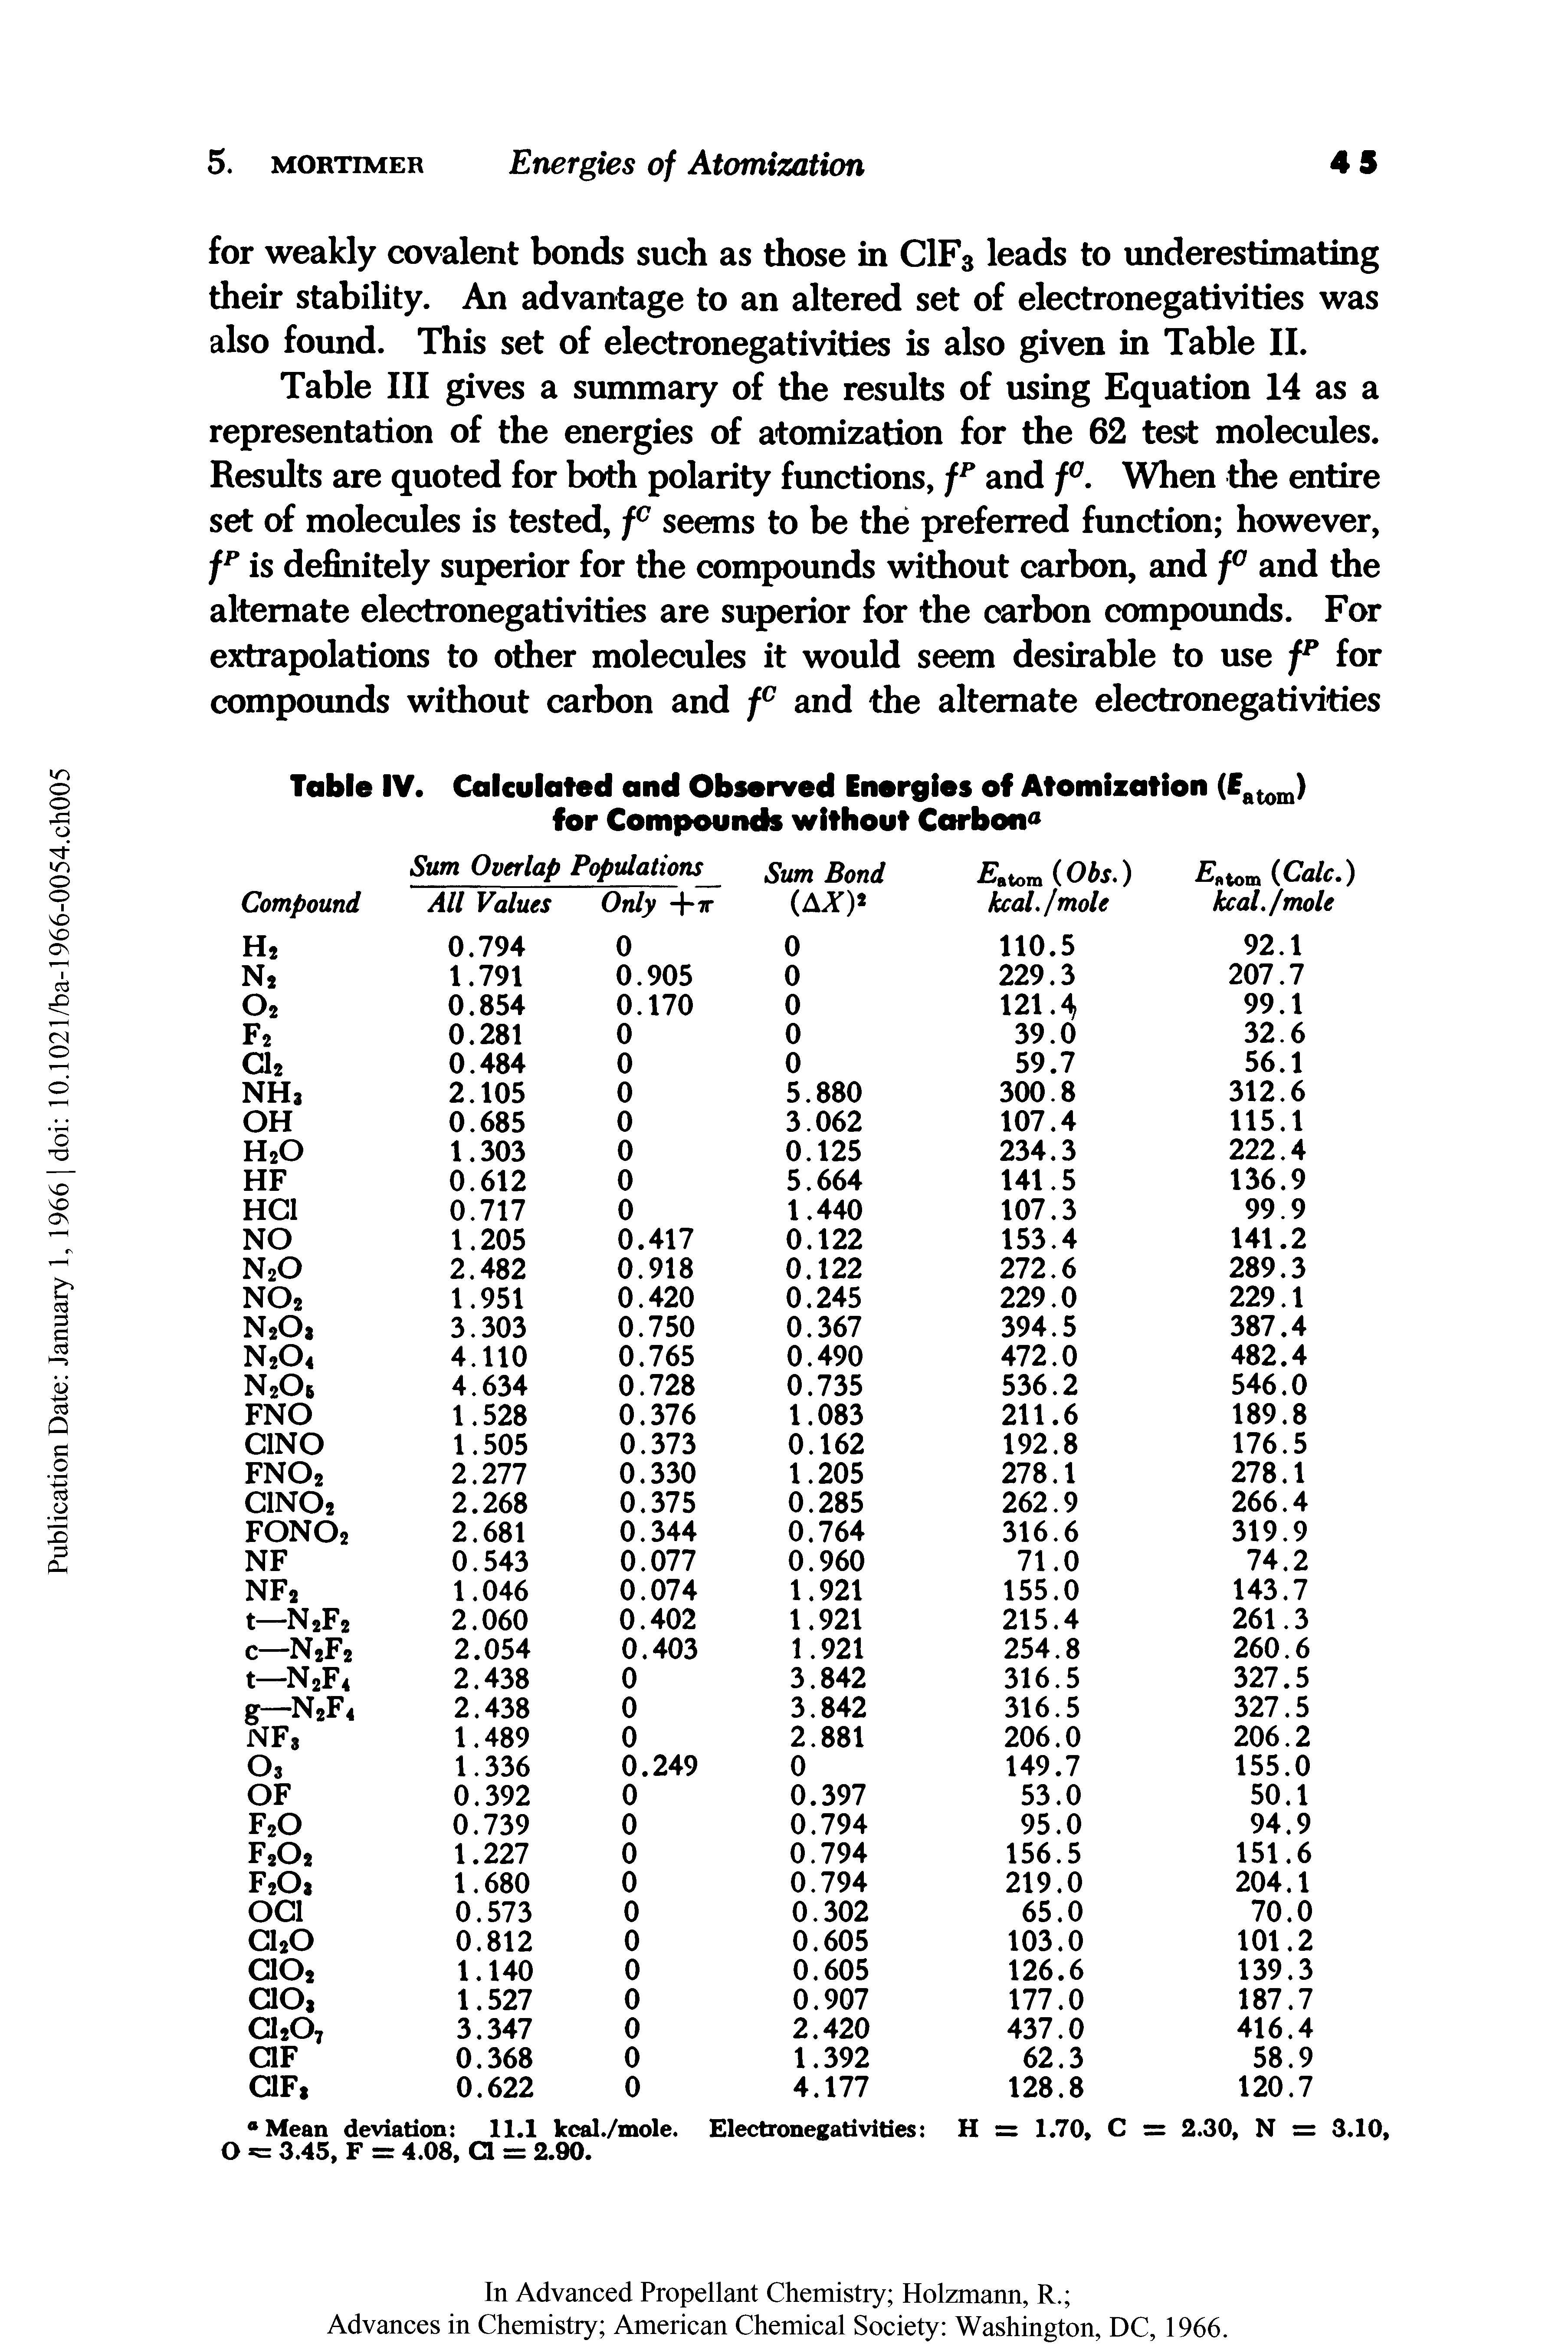 Table III gives a summary of the results of using Equation 14 as a representation of the energies of atomization for the 62 test molecules. Results are quoted for both polarity functions, fp and f°. When the entire set of molecules is tested, fc seems to be the preferred function however, fp is definitely superior for the compounds without carbon, and f° and the alternate electronegativities are superior for the carbon compounds. For extrapolations to other molecules it would seem desirable to use fp for compounds without carbon and fc and the alternate electronegativities...